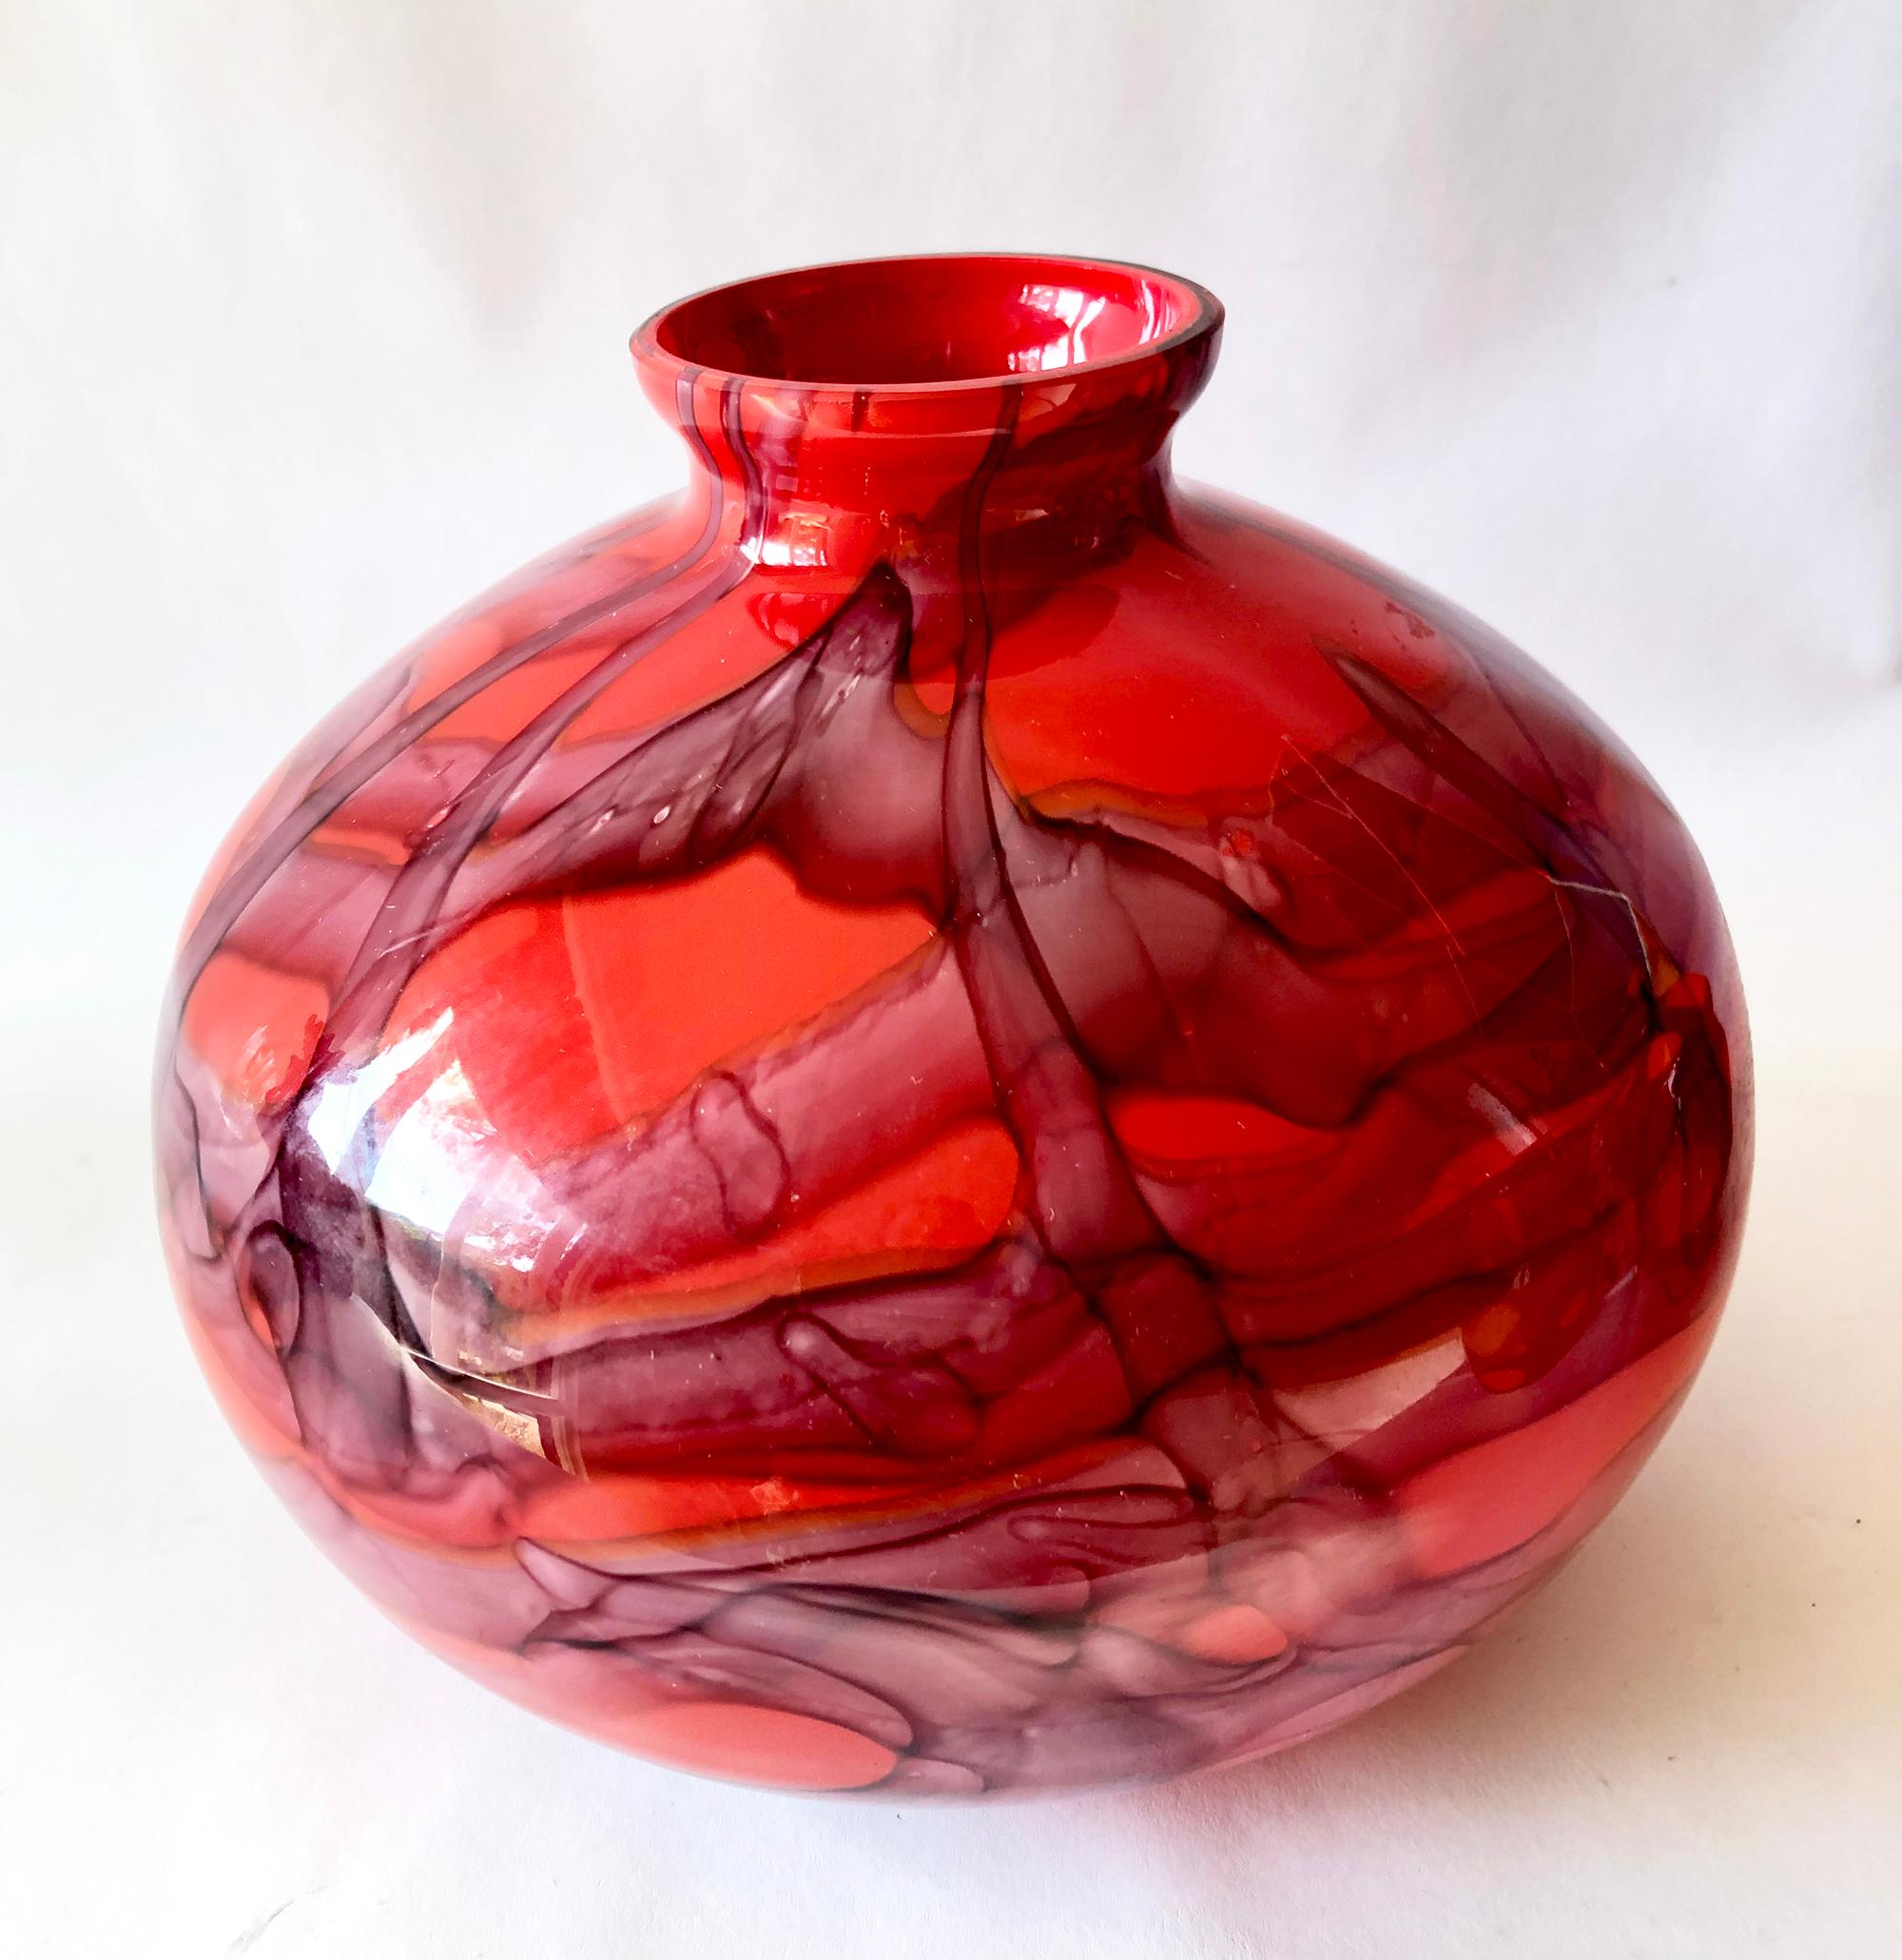 Beautiful collection of four Art Deco Czechoslovakian Kralik vases, circa 1920s-1930s. Large red ball vase measures 7.75 tall, small orange and green ball vases measure 6